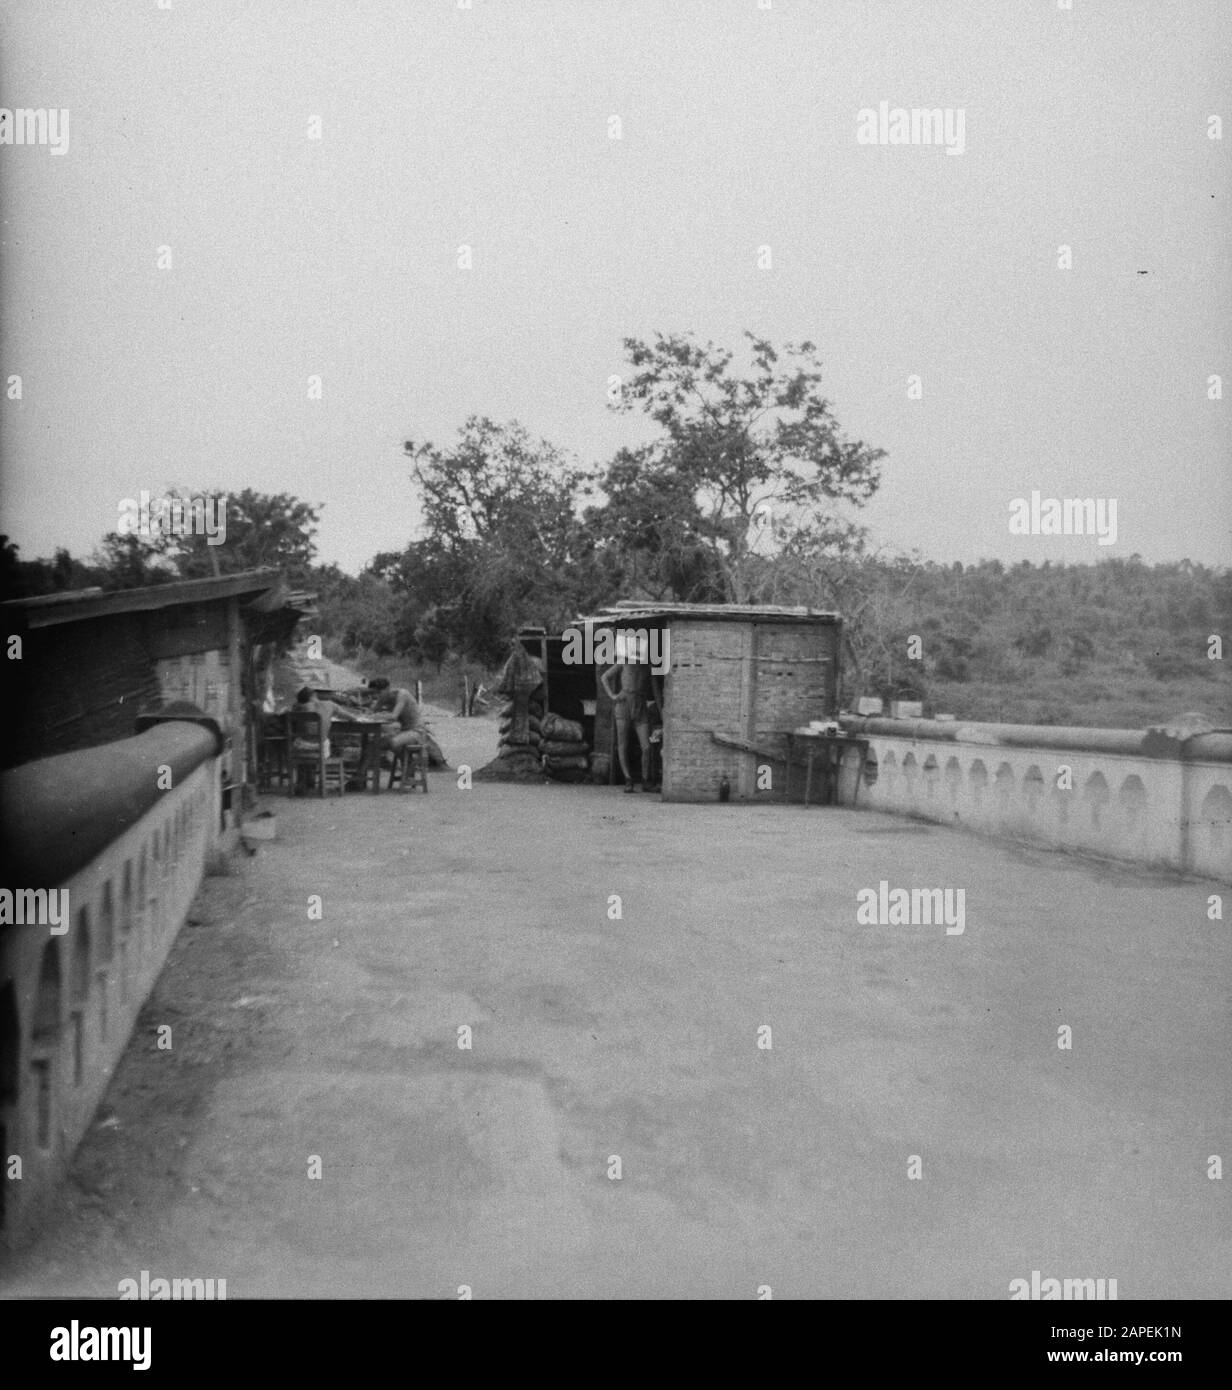 Security post on a bridge Annotation: DJKNIET IN order Date: 1947 Location: Indonesia, Dutch East Indies Stock Photo